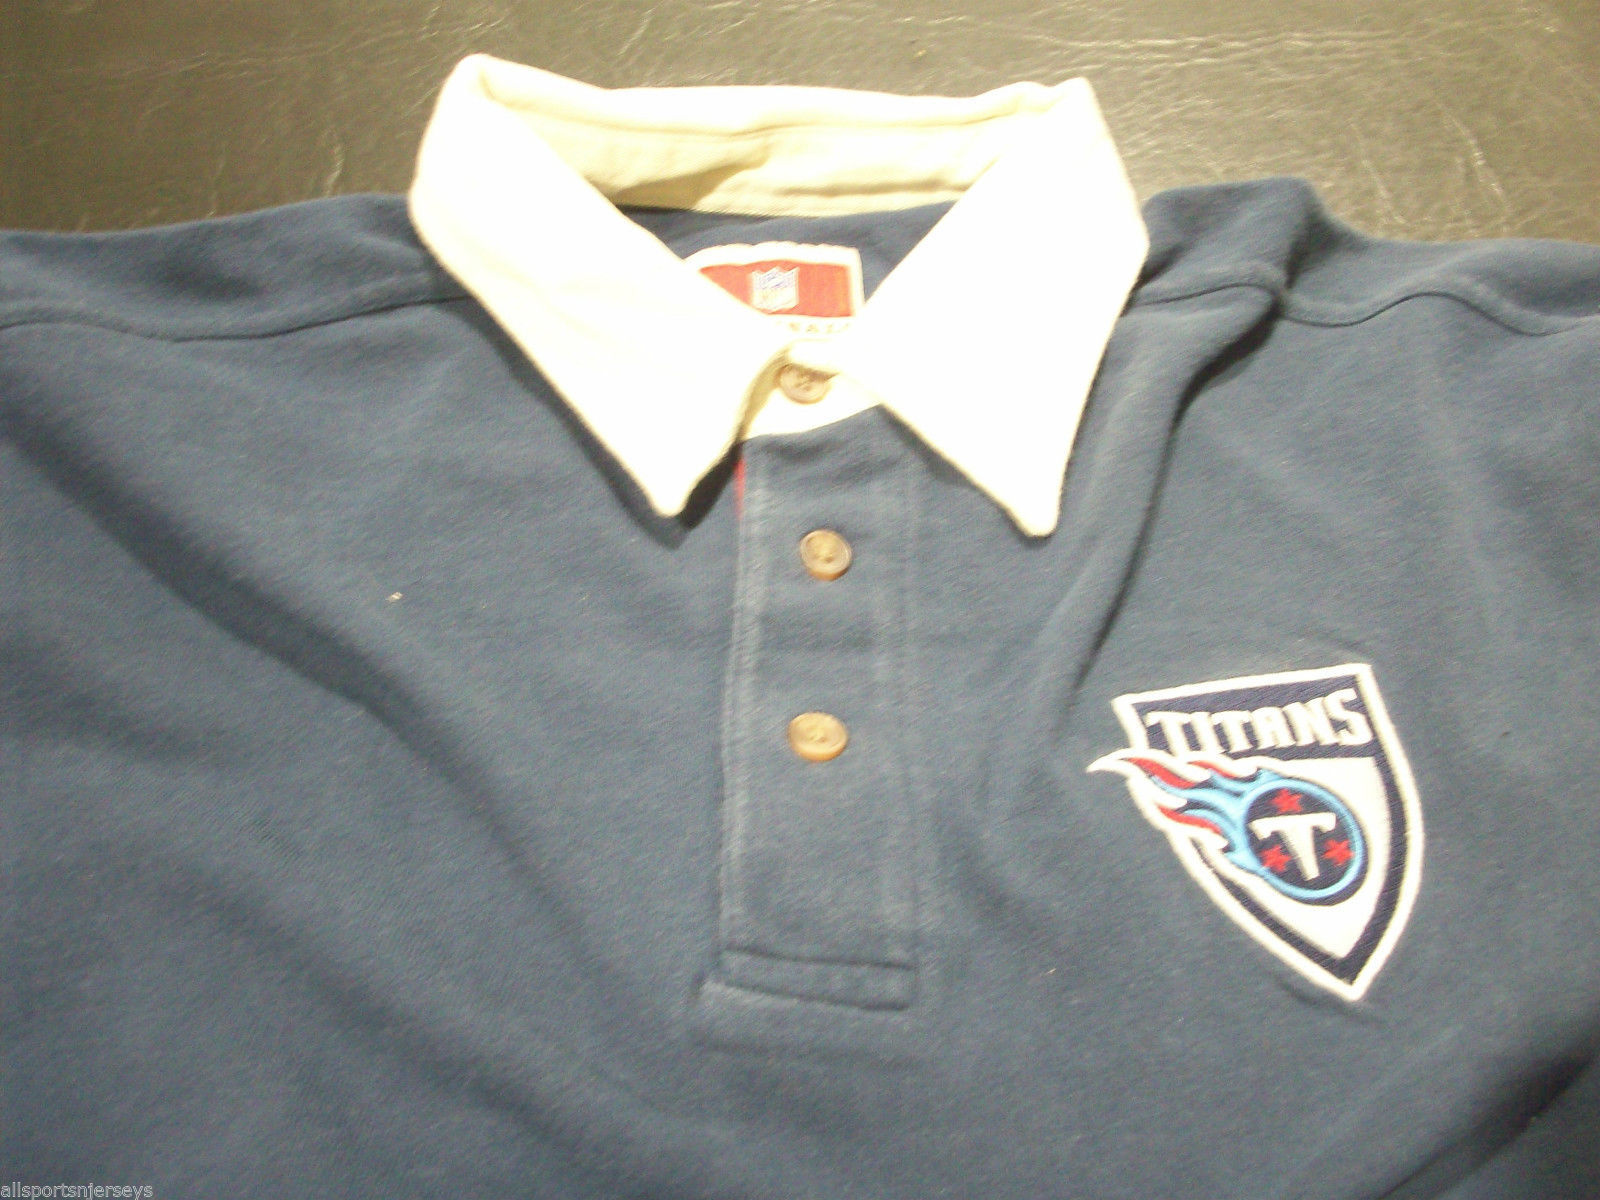 NFL Tennessee Titans Crew Neck Rugby Long Sleeve Shirt size LARGE by VF - $34.95